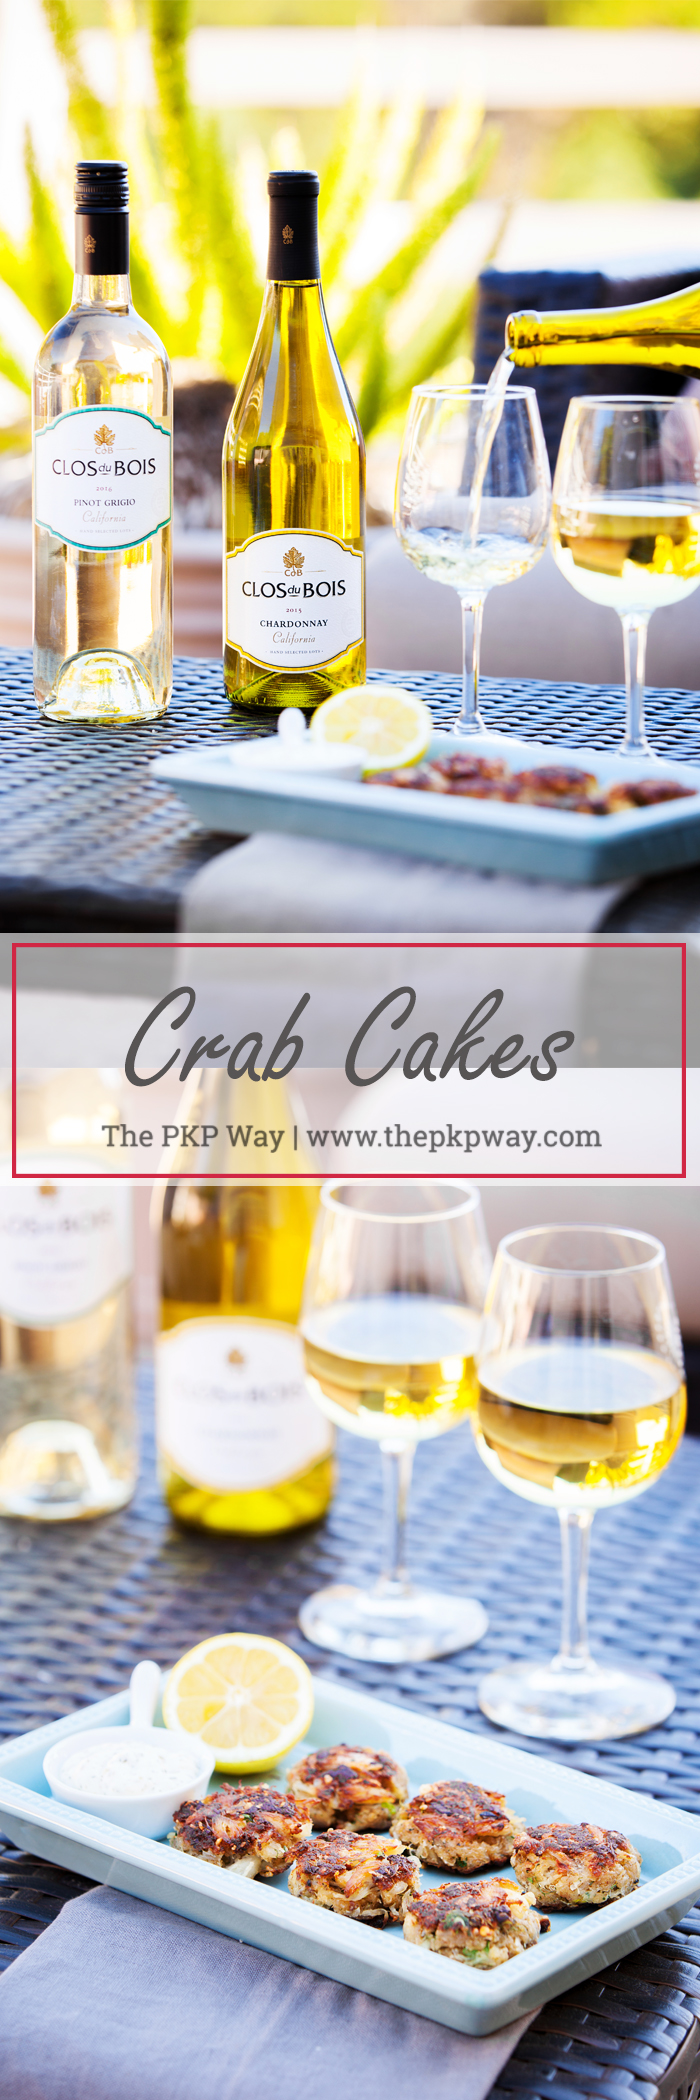 Pan fried Crab Cakes with succulent lump crab meat and fresh herbs.